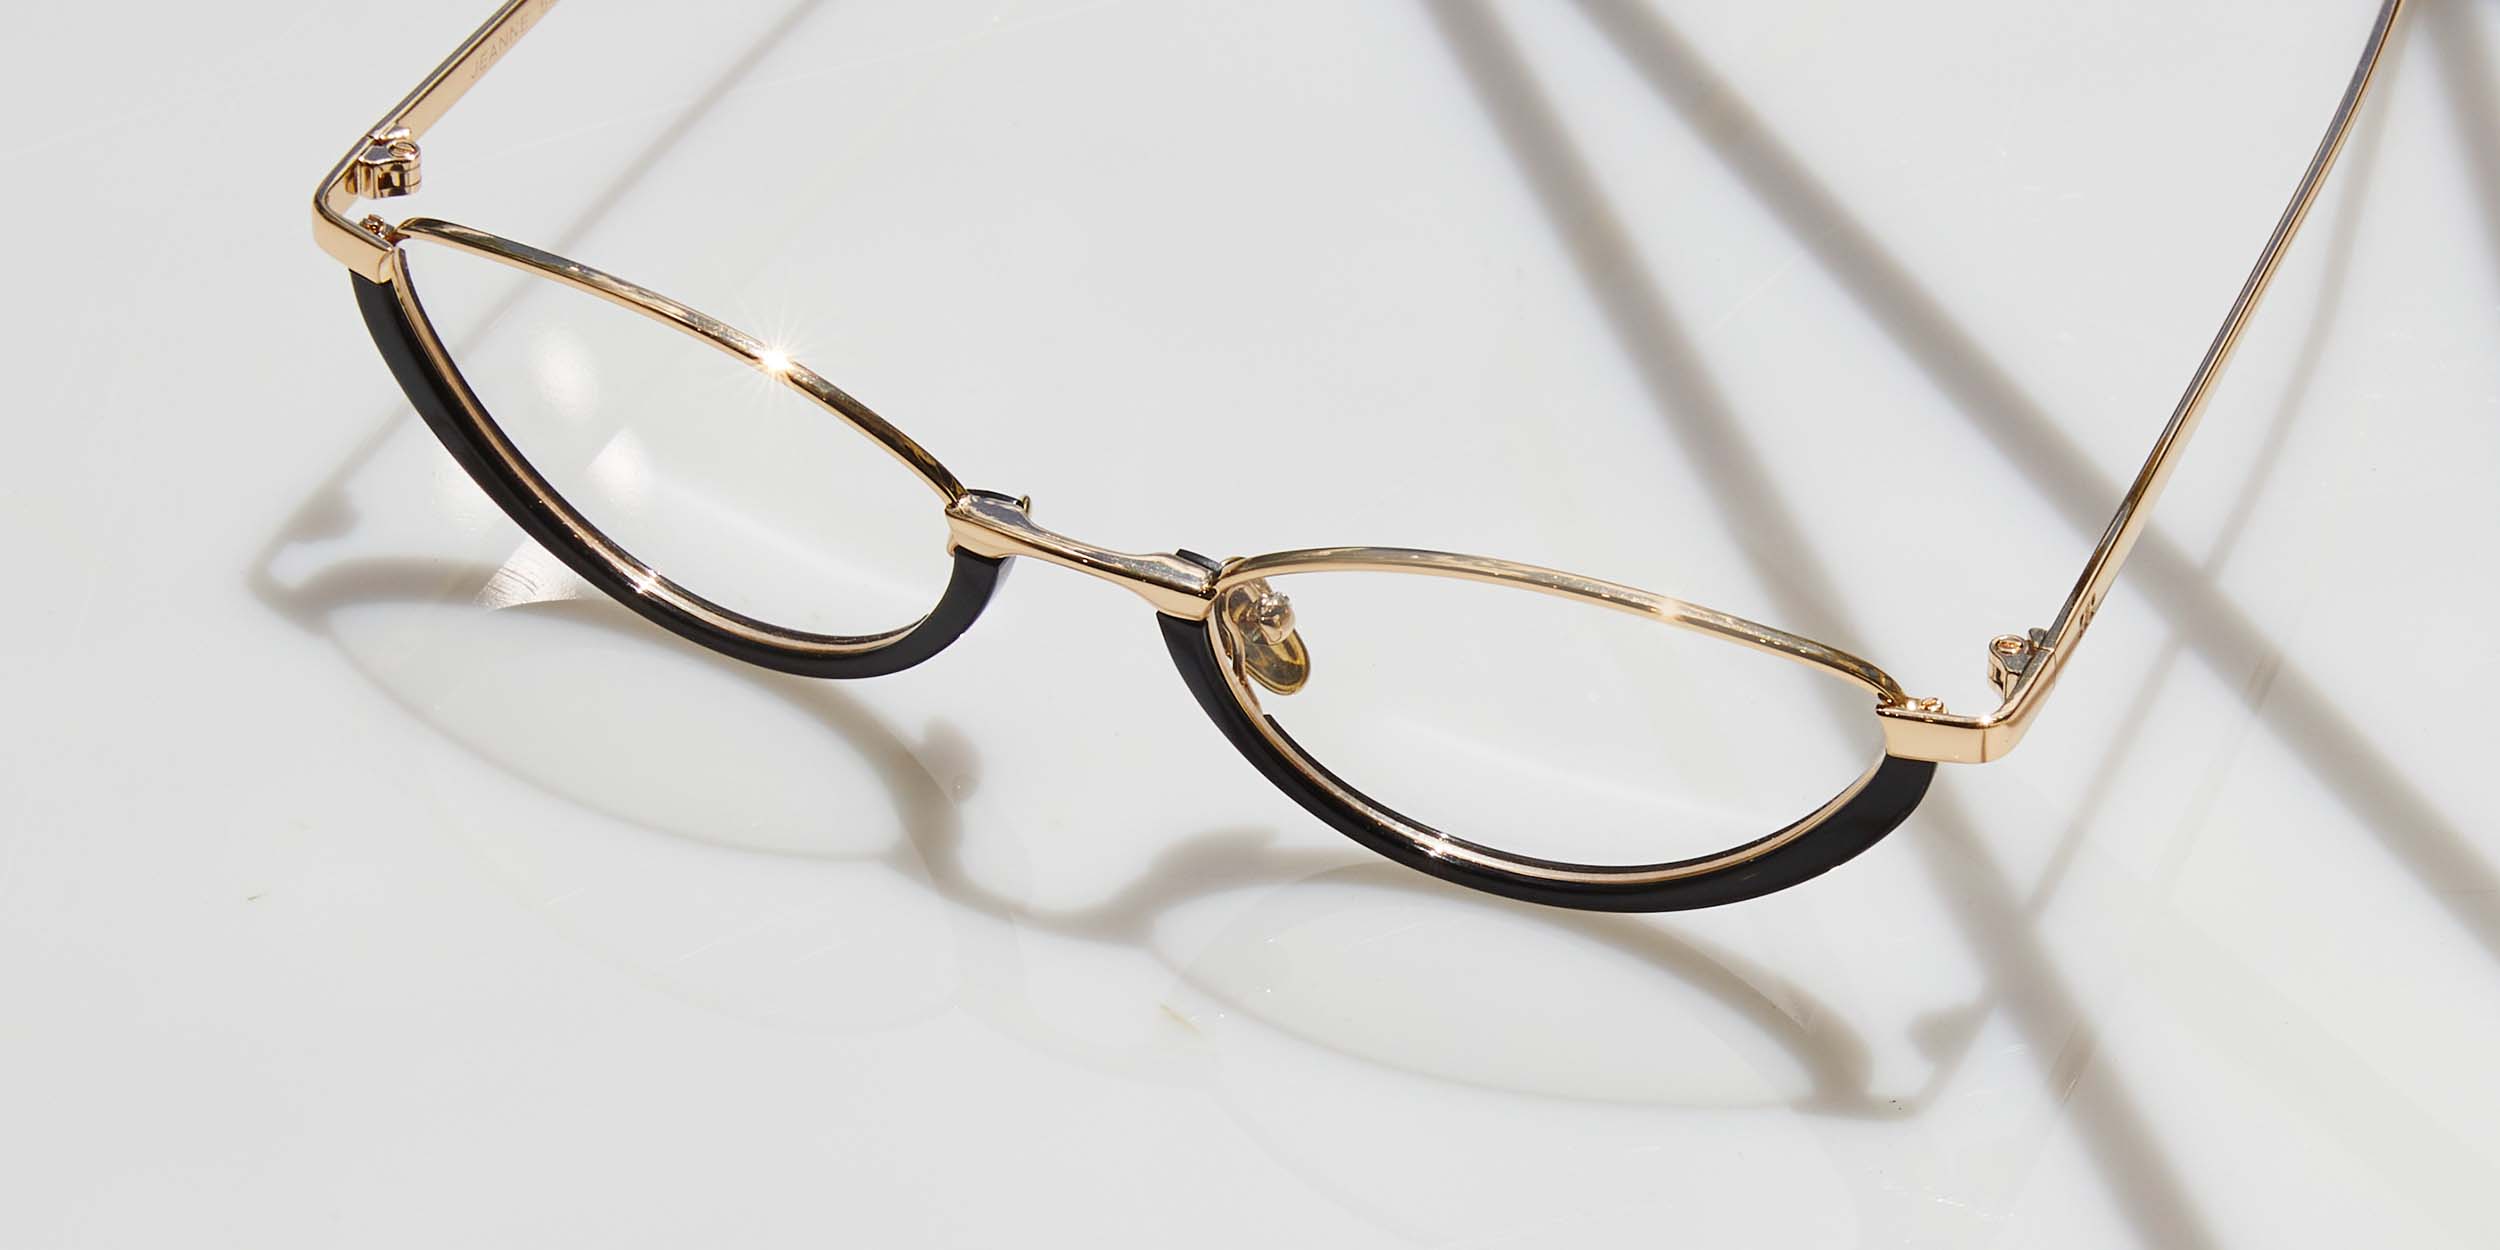 Photo Details of Jeanne Tortoise & Gold Reading Glasses in a room